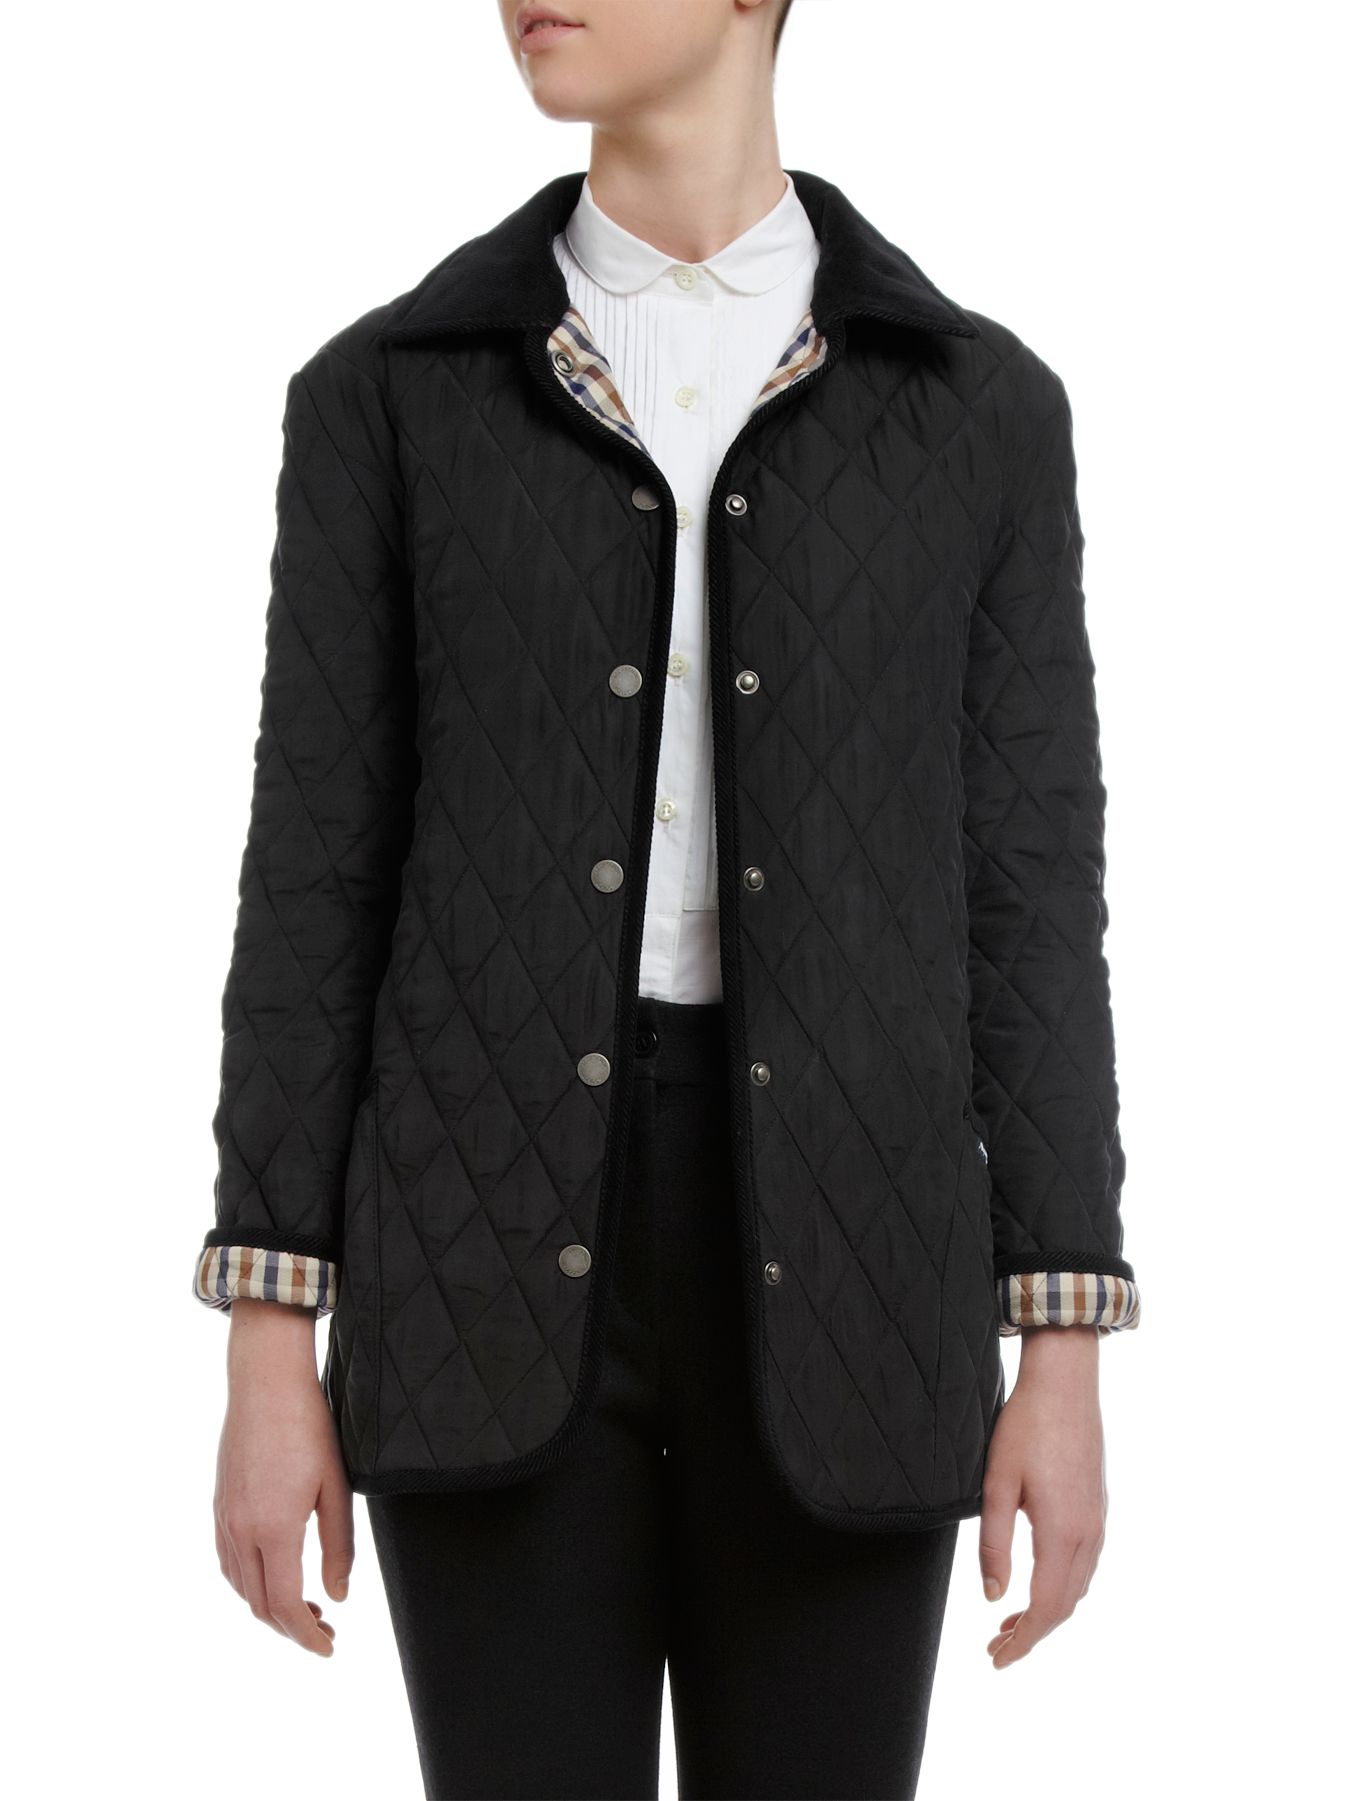 Aquascutum Open Patch Pocket Quilted Jacket, Black at John Lewis